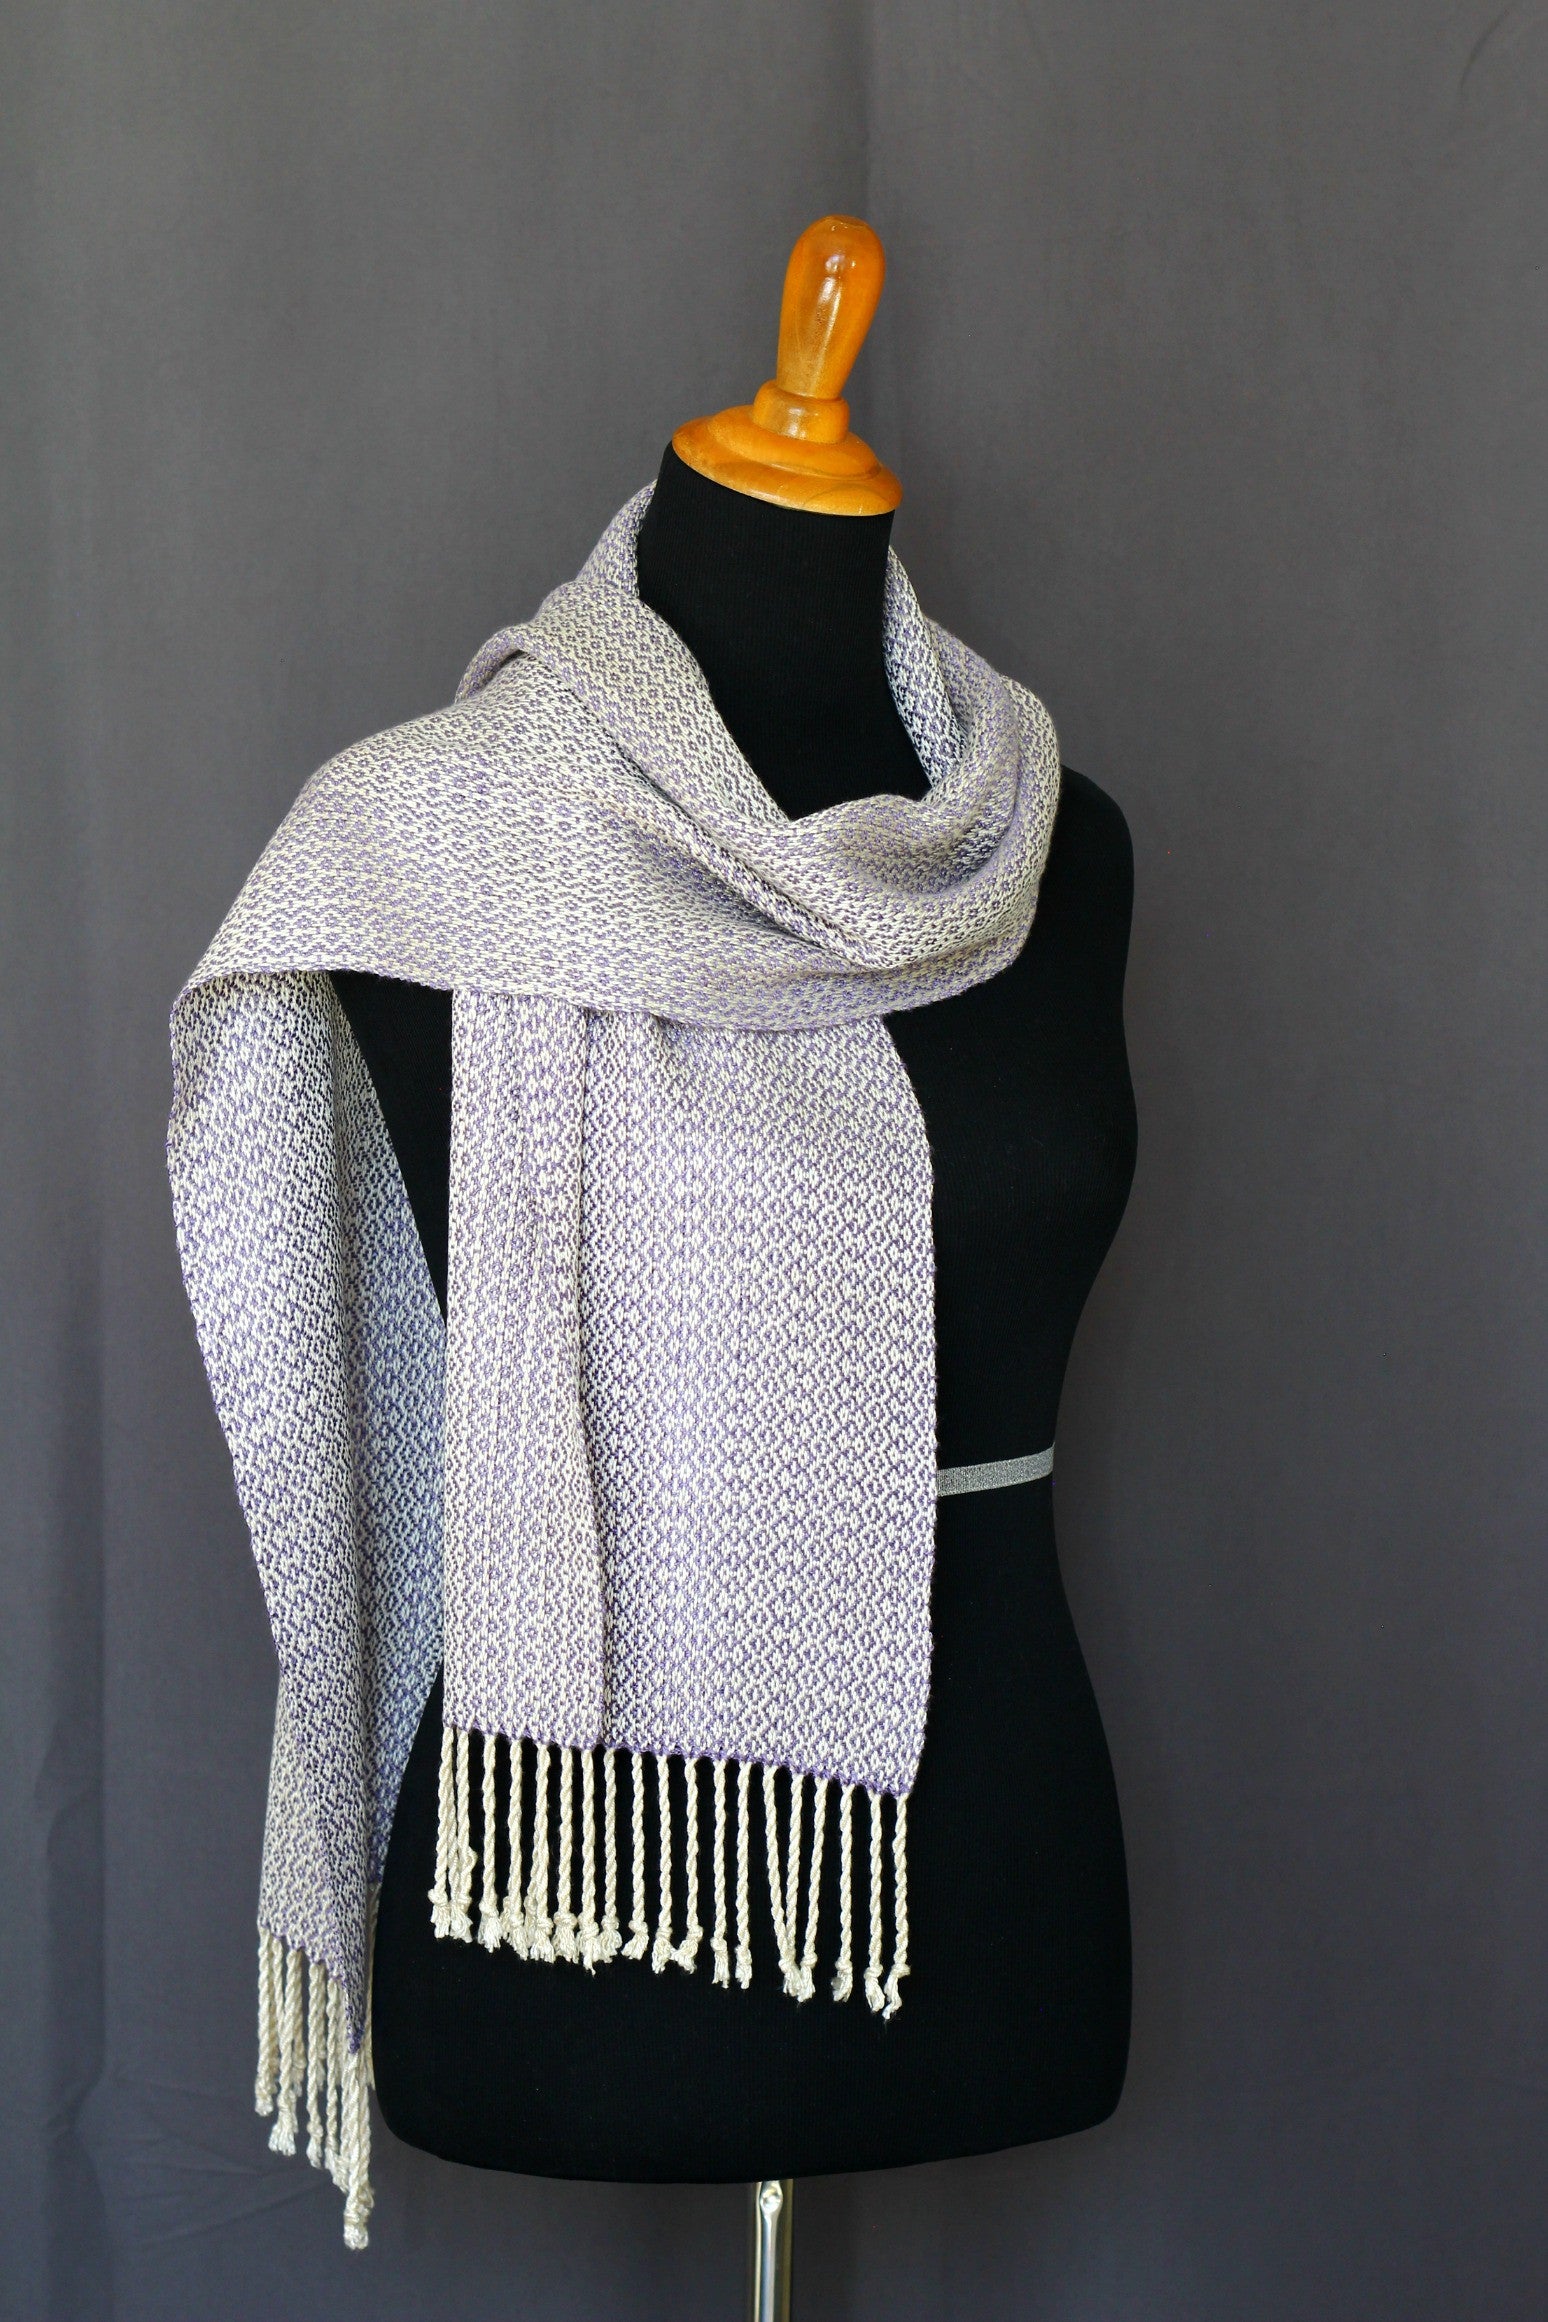 Woven scarf in violet colors, bamboo scarf, summer scarf, long scarf with fringe